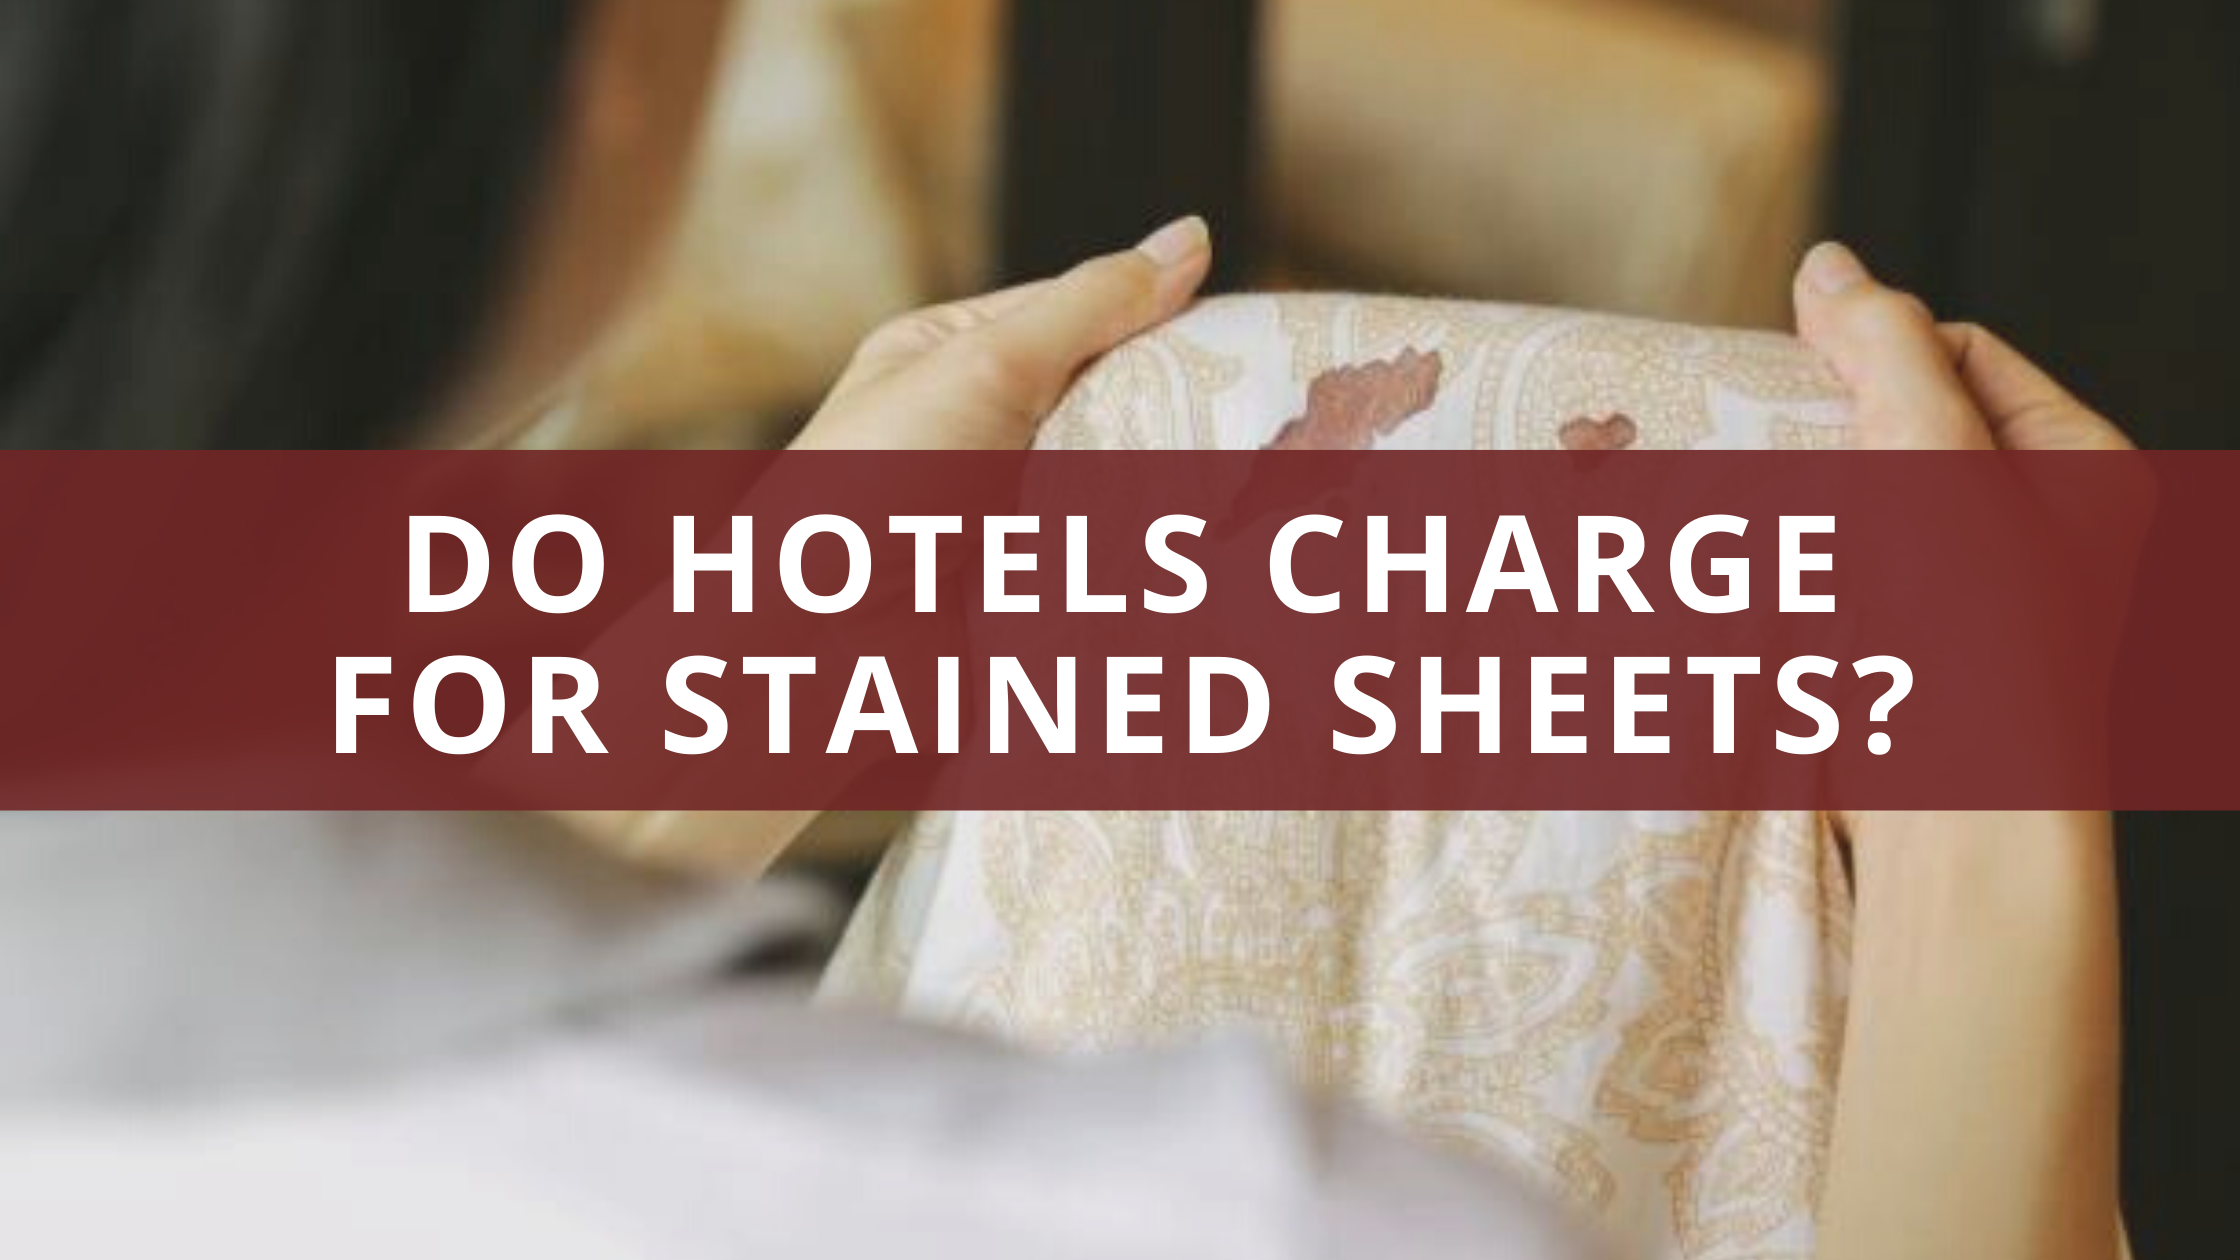 Do hotels charge for stained sheets?